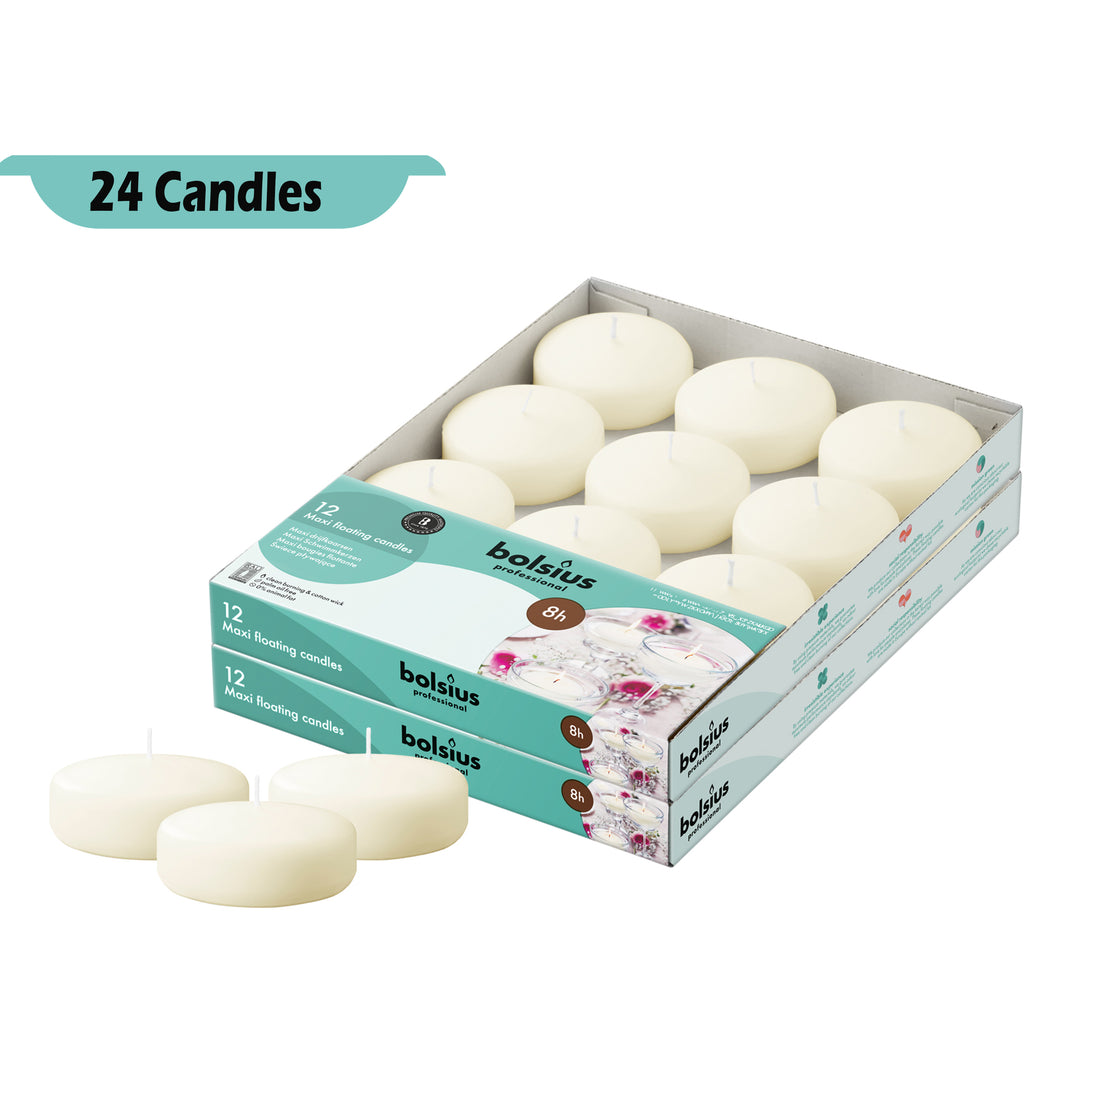 3" X 1" Classic Floating Candles - 24 Pack